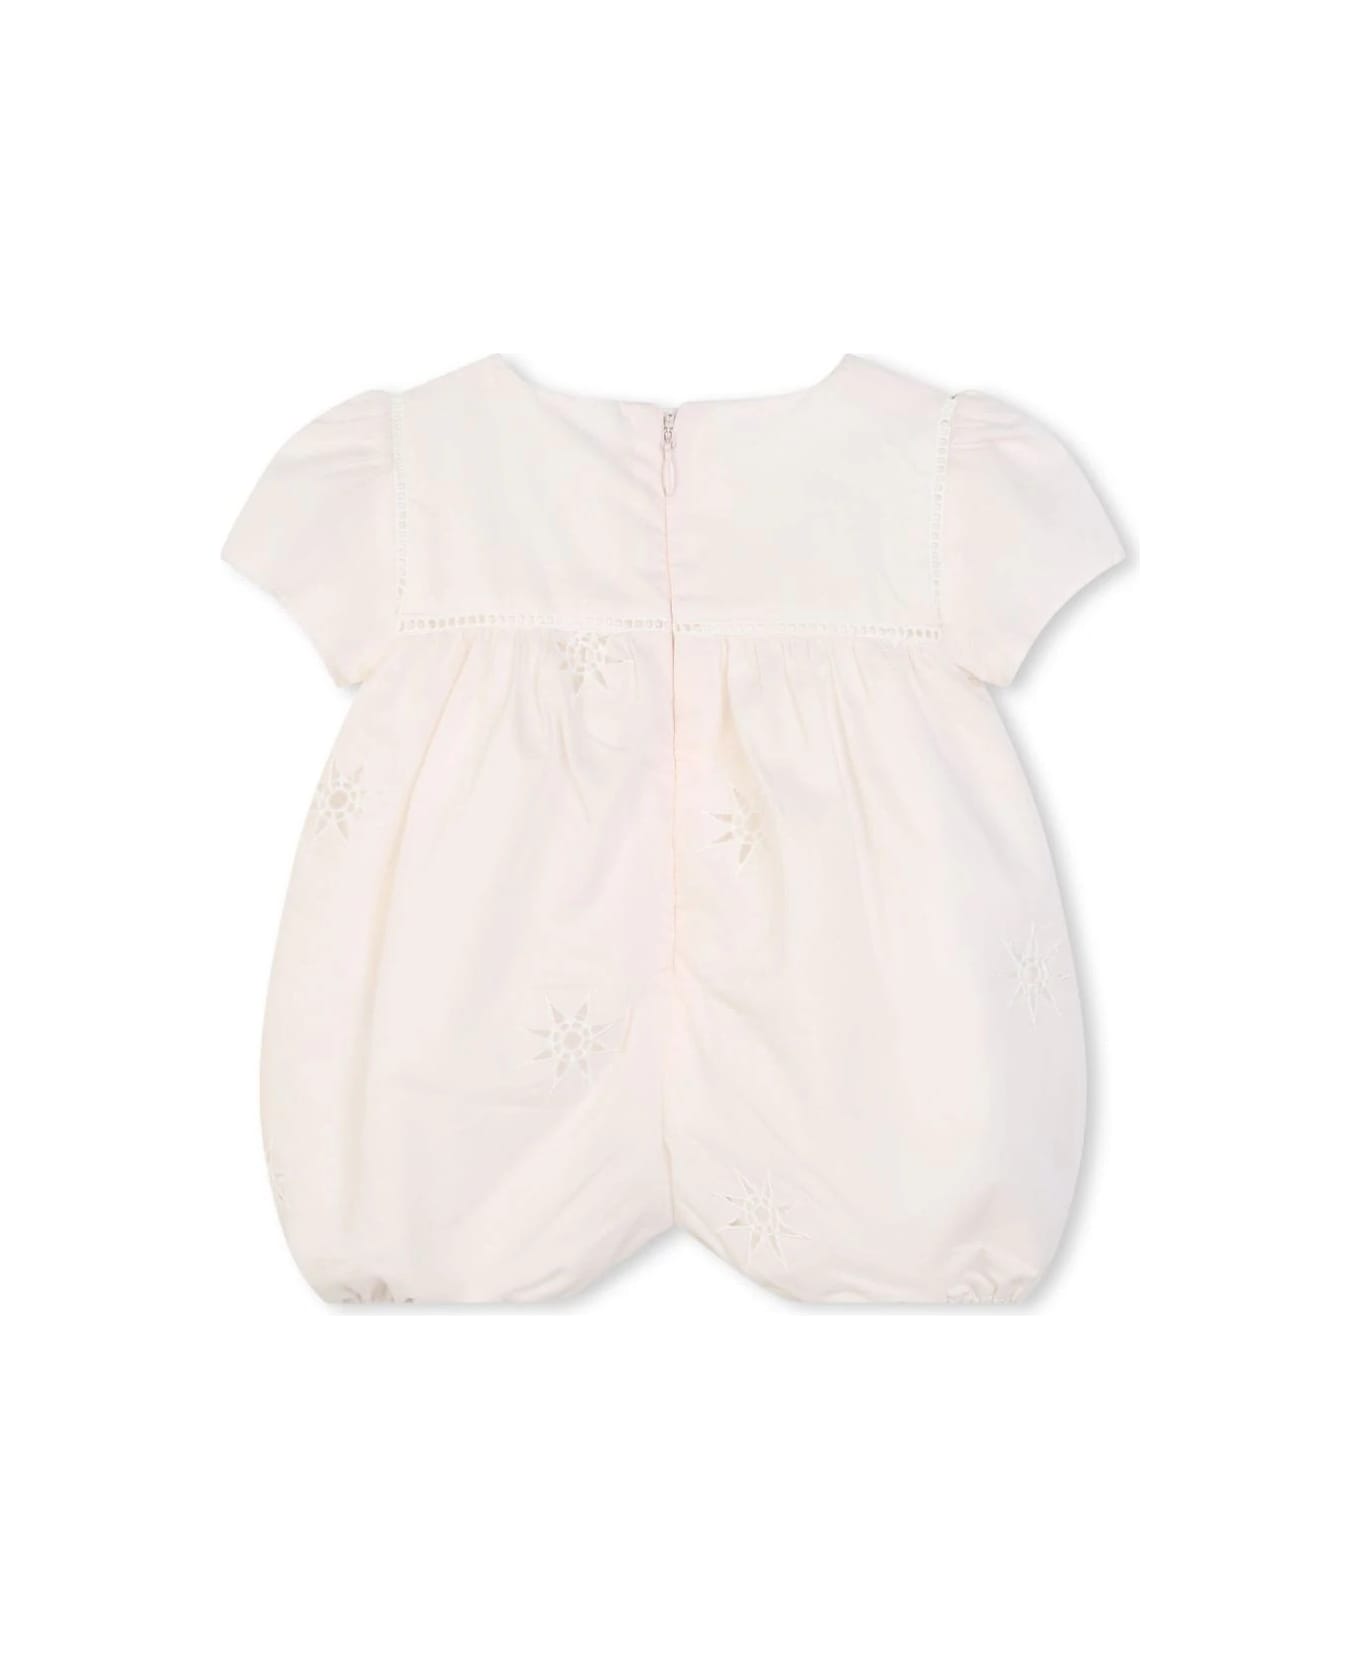 Chloé Light Pink Romper With Embroidery - White